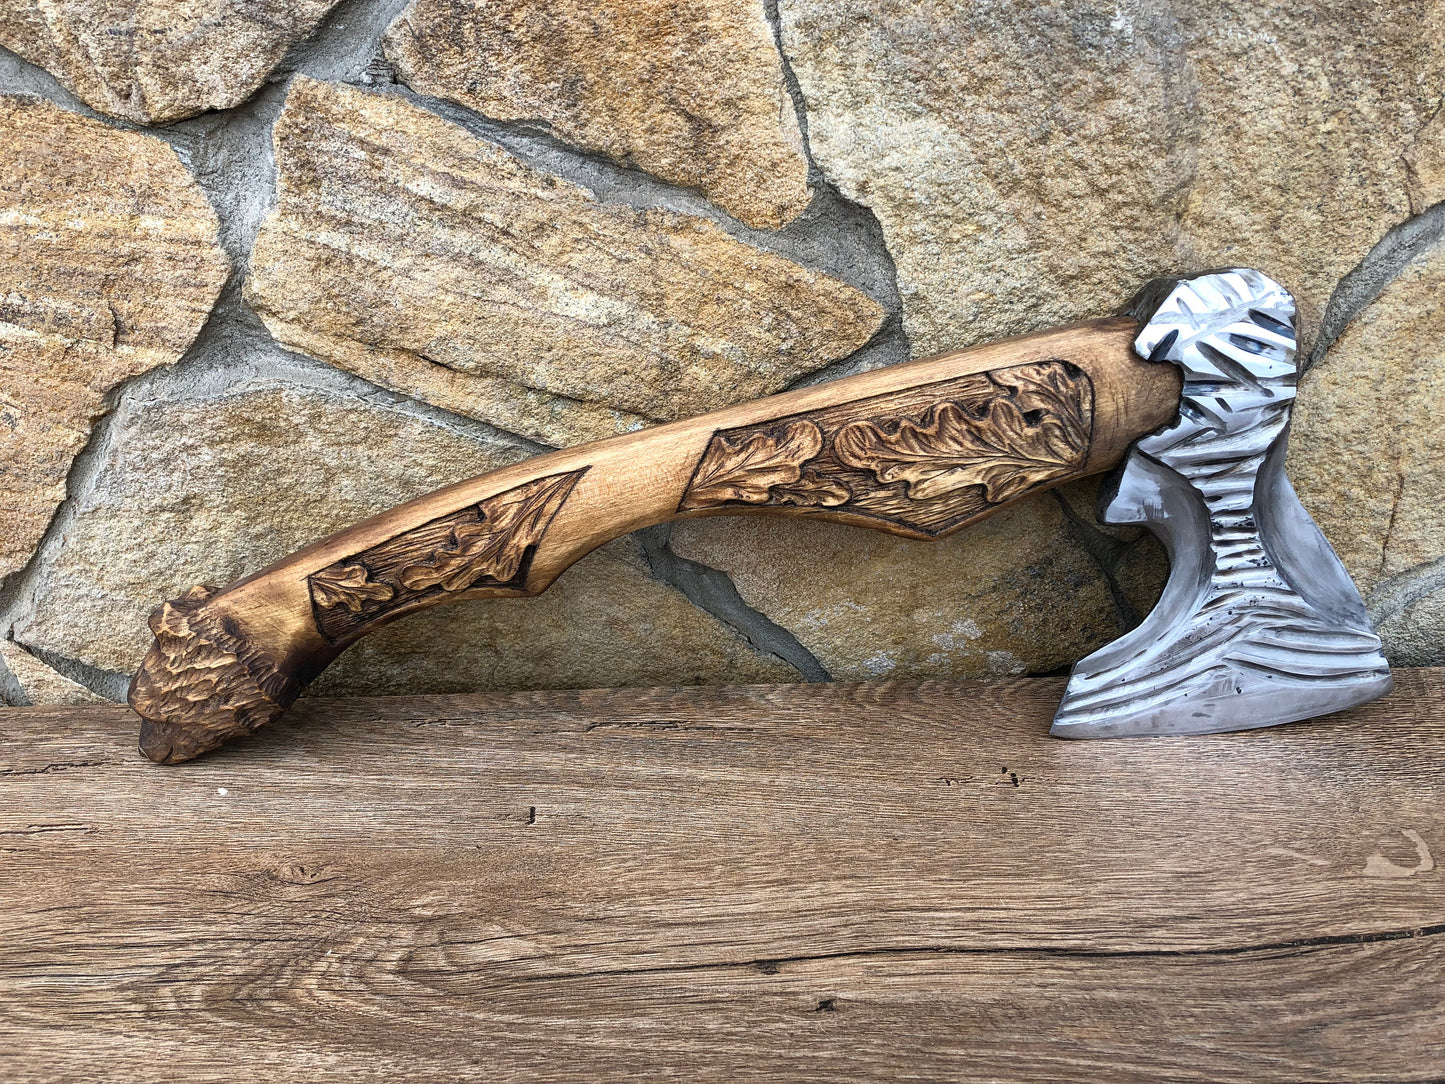 viking axe, medieval axe, mens gifts, iron gift for him, tomahawk, hatchet, hiking, hunting, chopping axe, gifts for men, manly iron gifts